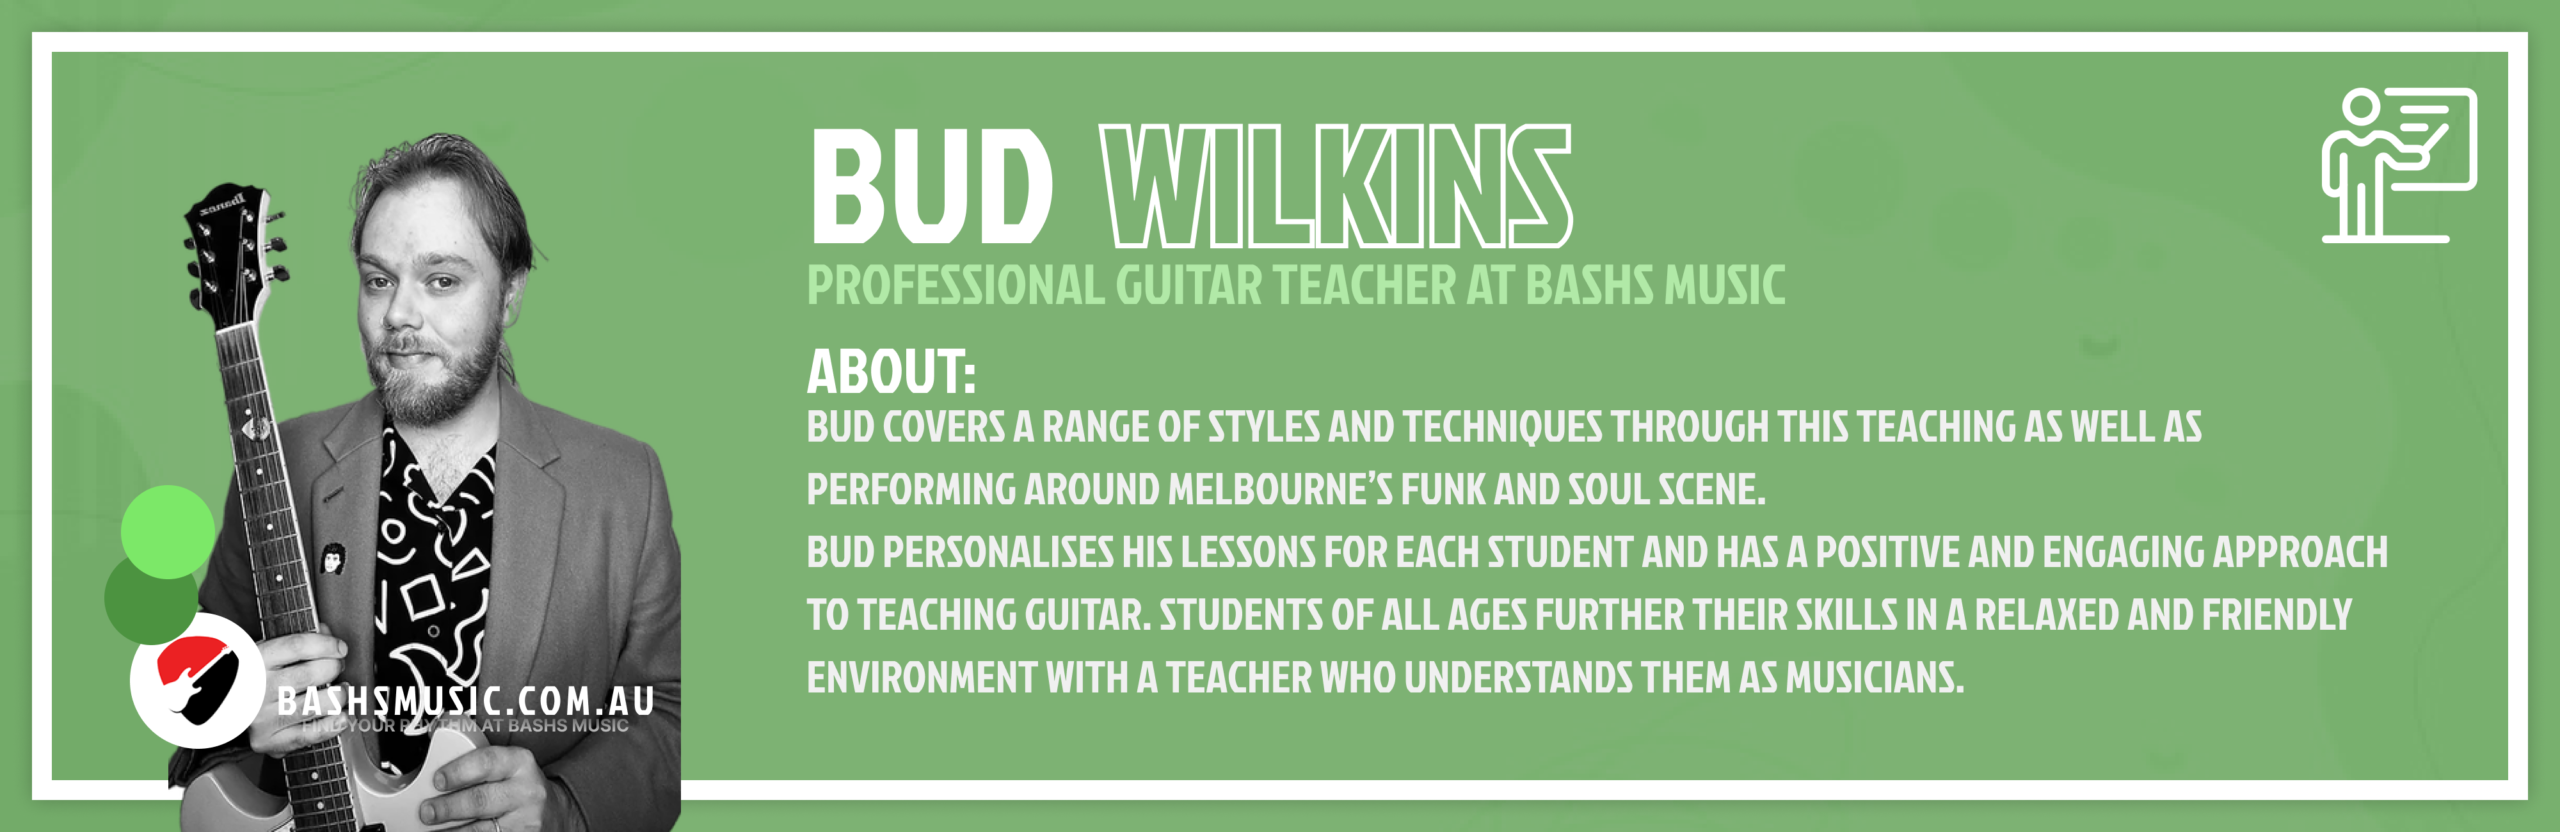 Bud Wilkins
Professional Guitar Teacher At Bashs Music
Bud covers a range of styles and techniques through this teaching as well as performing around Melbourne’s Funk and Soul scene.
Bud personalises his lessons for each student and has a positive and engaging approach to teaching guitar. Students of all ages further their skills in a relaxed and friendly environment with a teacher who understands them as musicians.